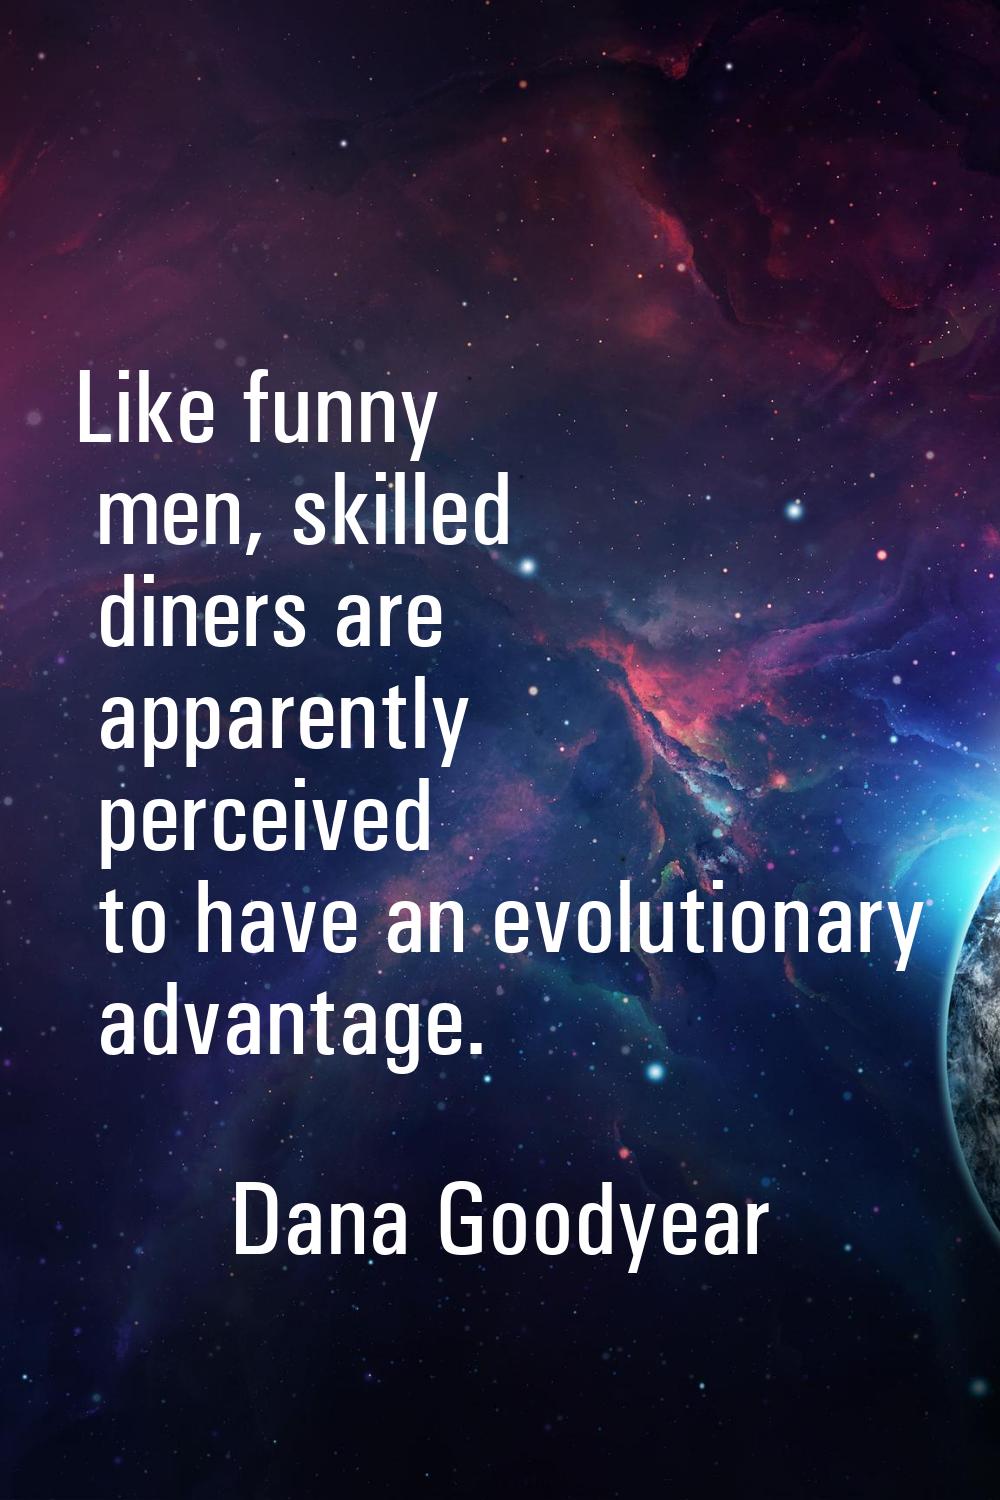 Like funny men, skilled diners are apparently perceived to have an evolutionary advantage.